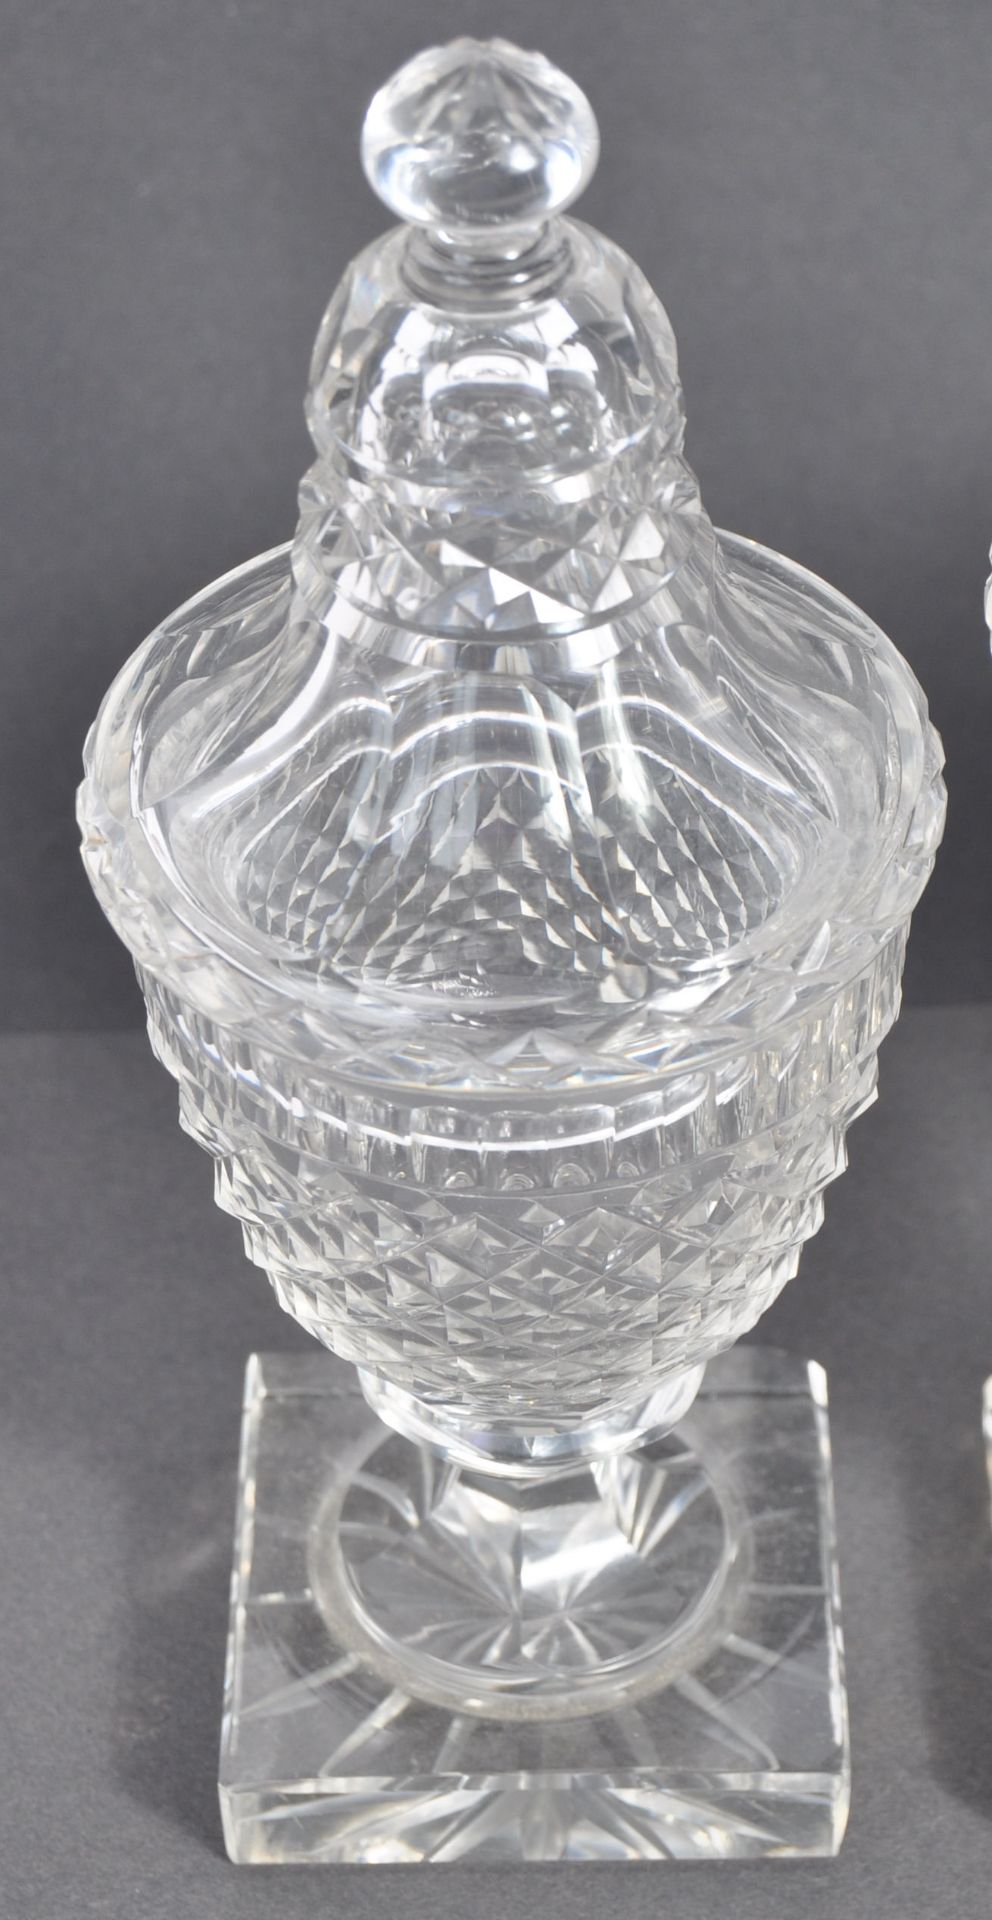 SET OF THREE EARLY 19TH CENTURY ANTIQUE GLASS LIDDED URNS - Image 2 of 4